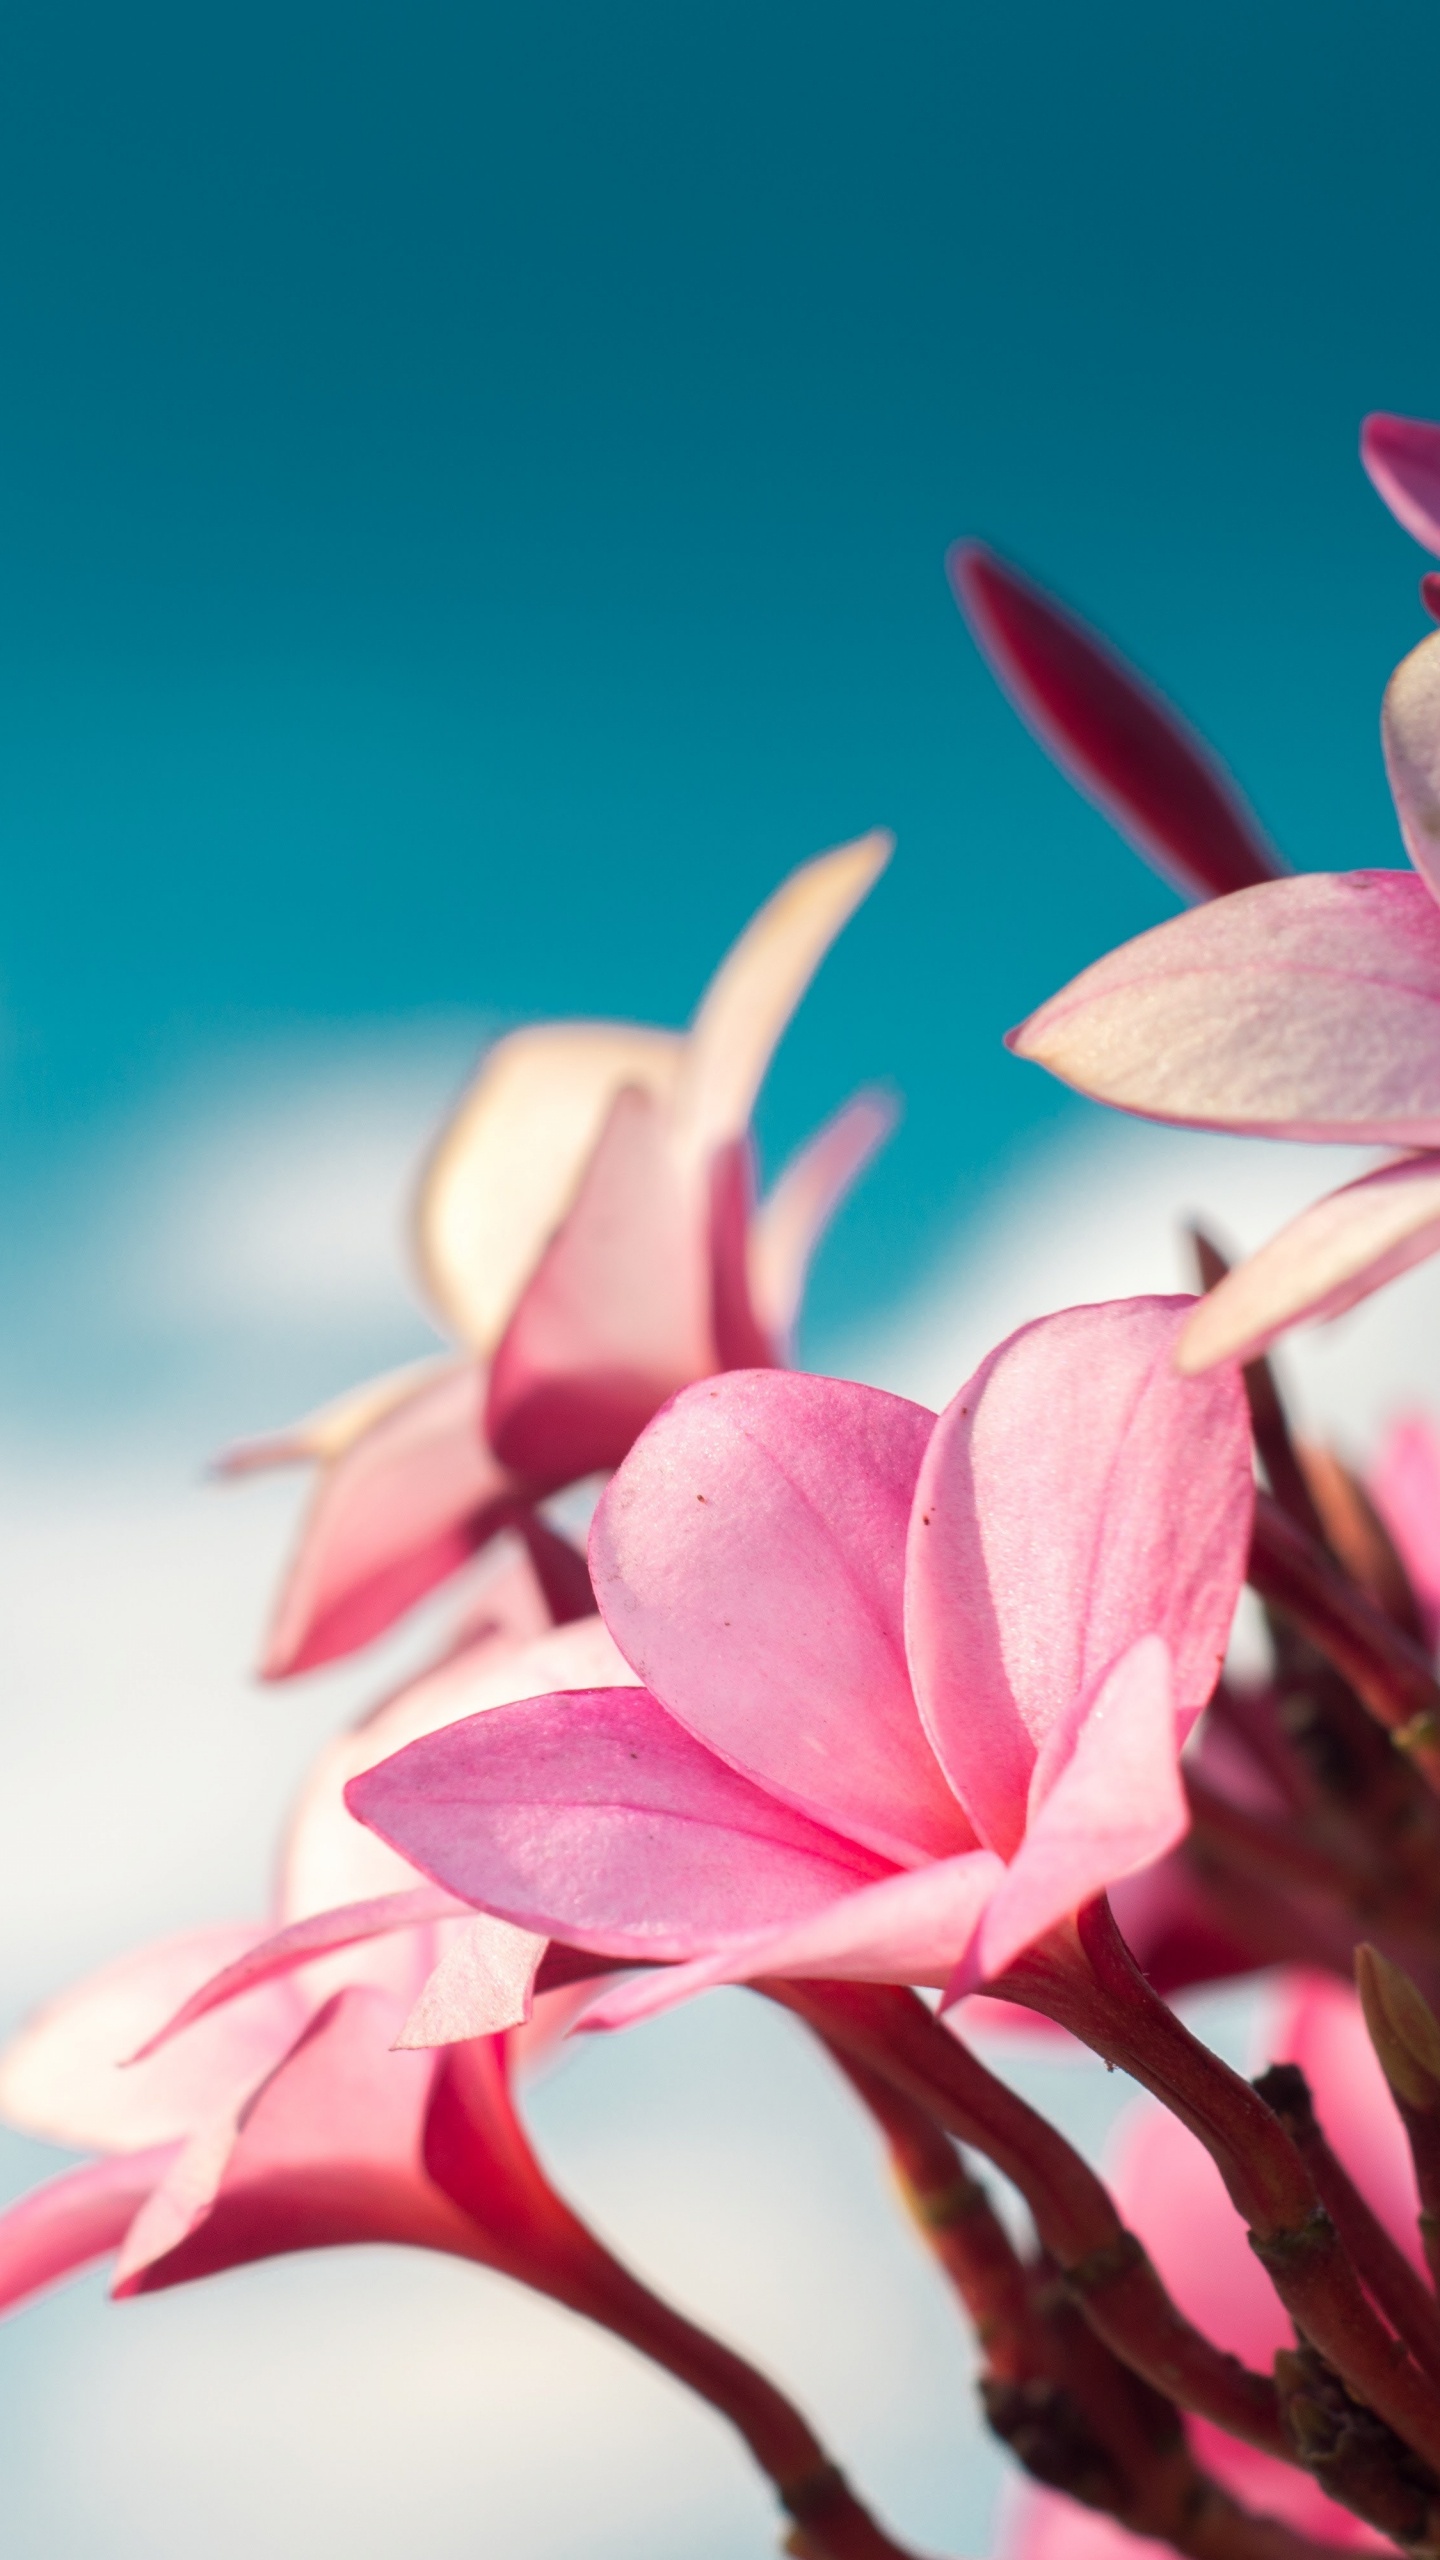 Pink and White Flower in Close up Photography. Wallpaper in 1440x2560 Resolution